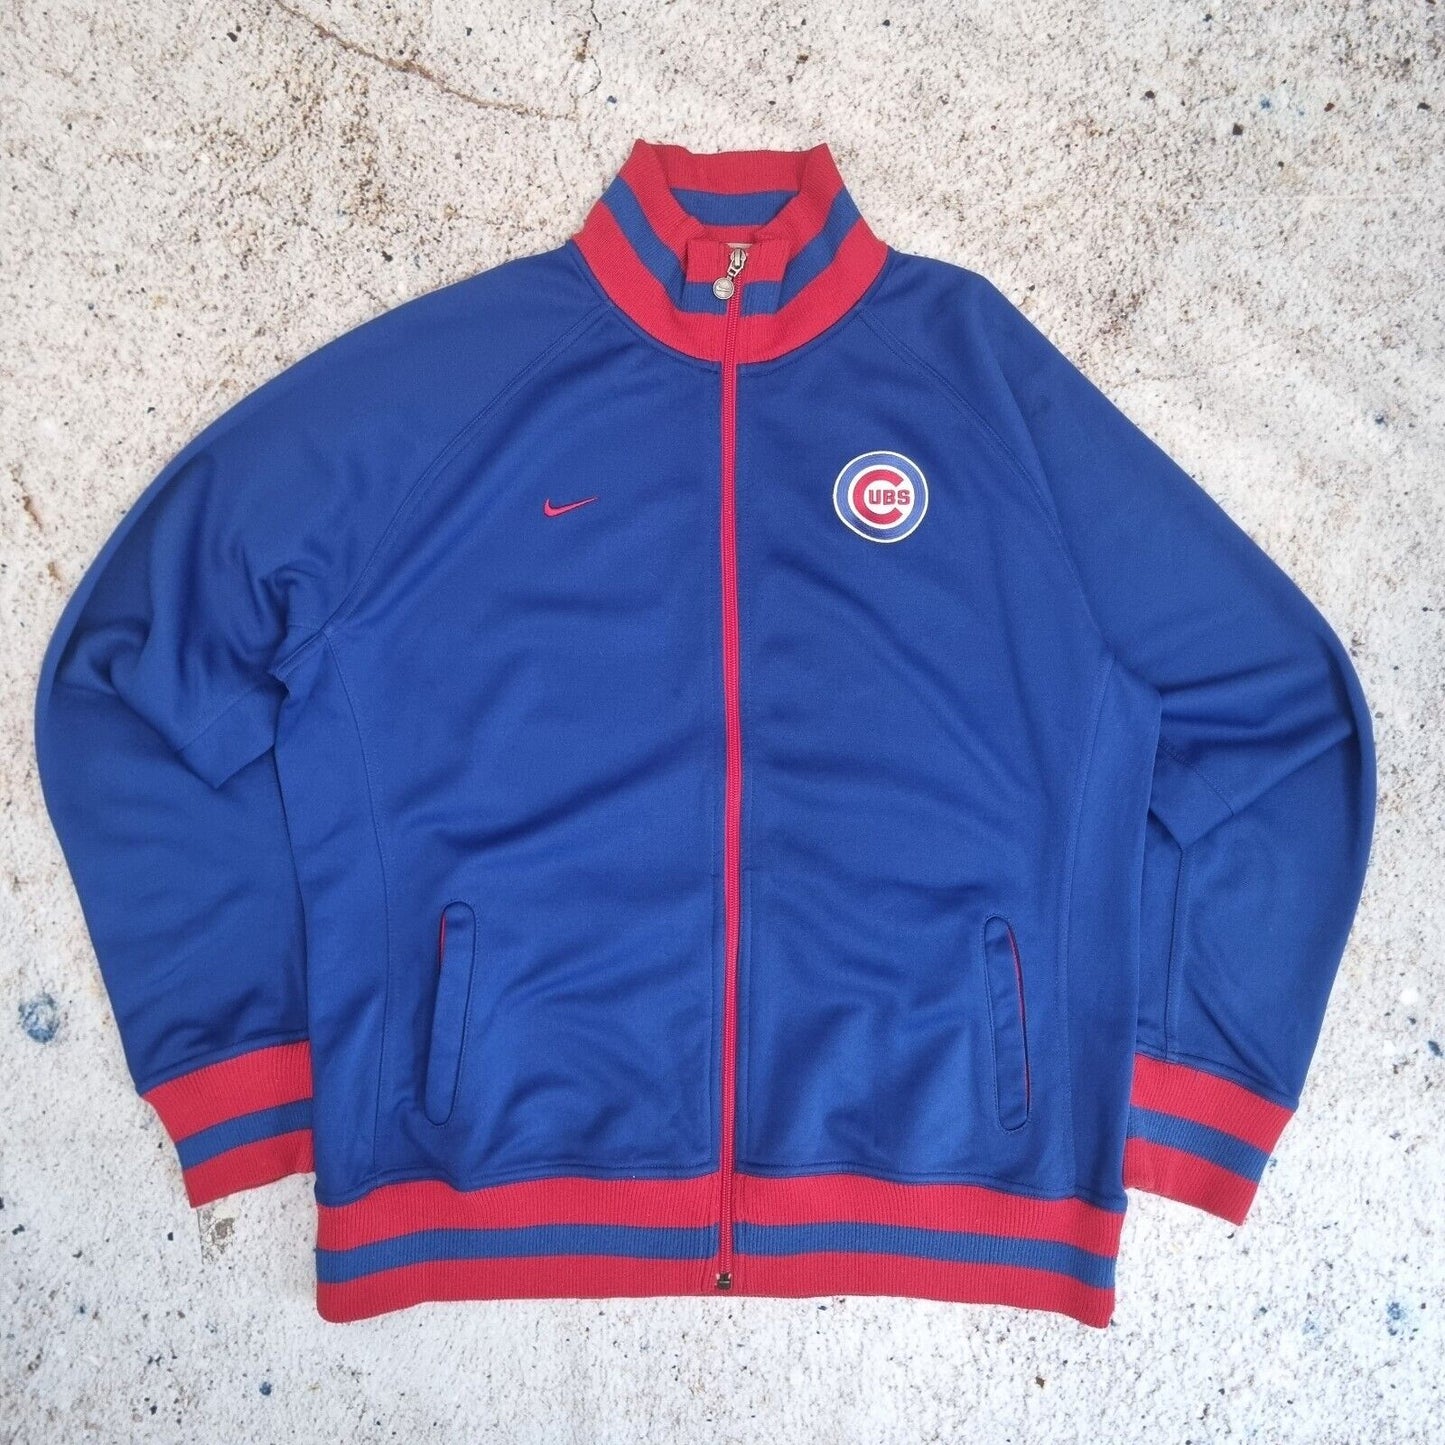 Nike TEAM Chicago Cubs Track Jacket Size XXLL Blue Red